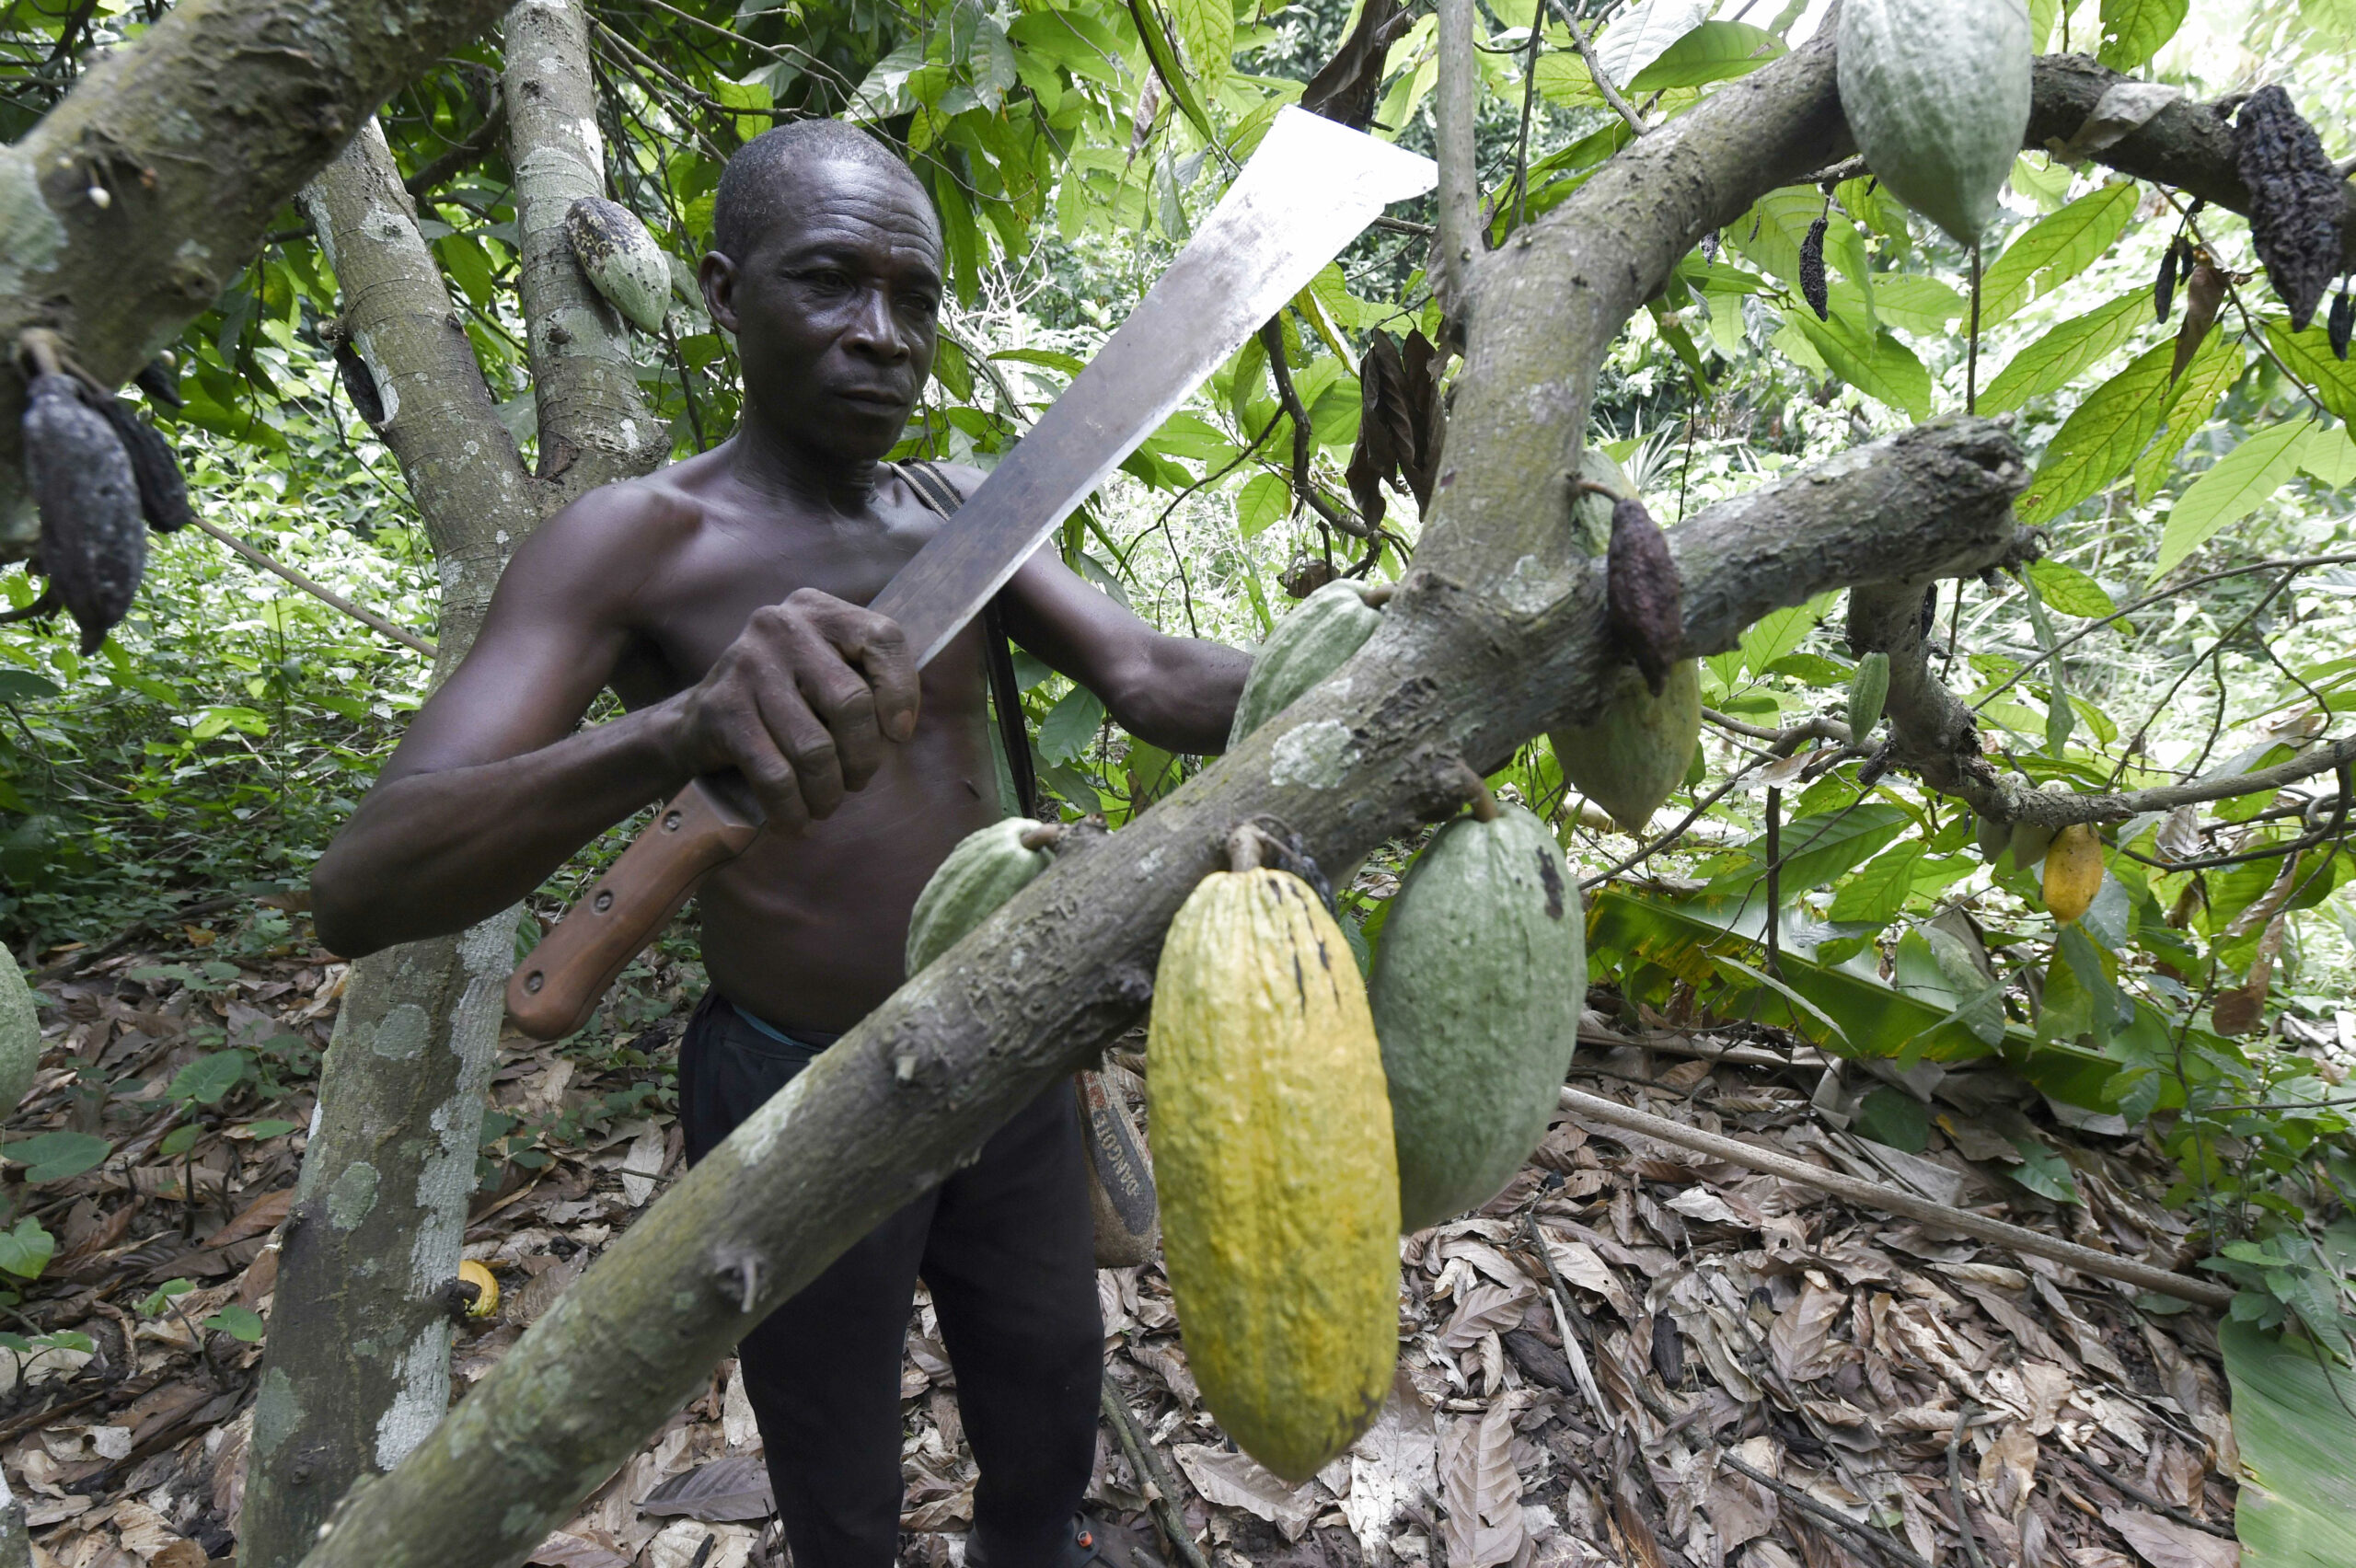 Nestle’s CEO says tackling child labor in cocoa needs new approach